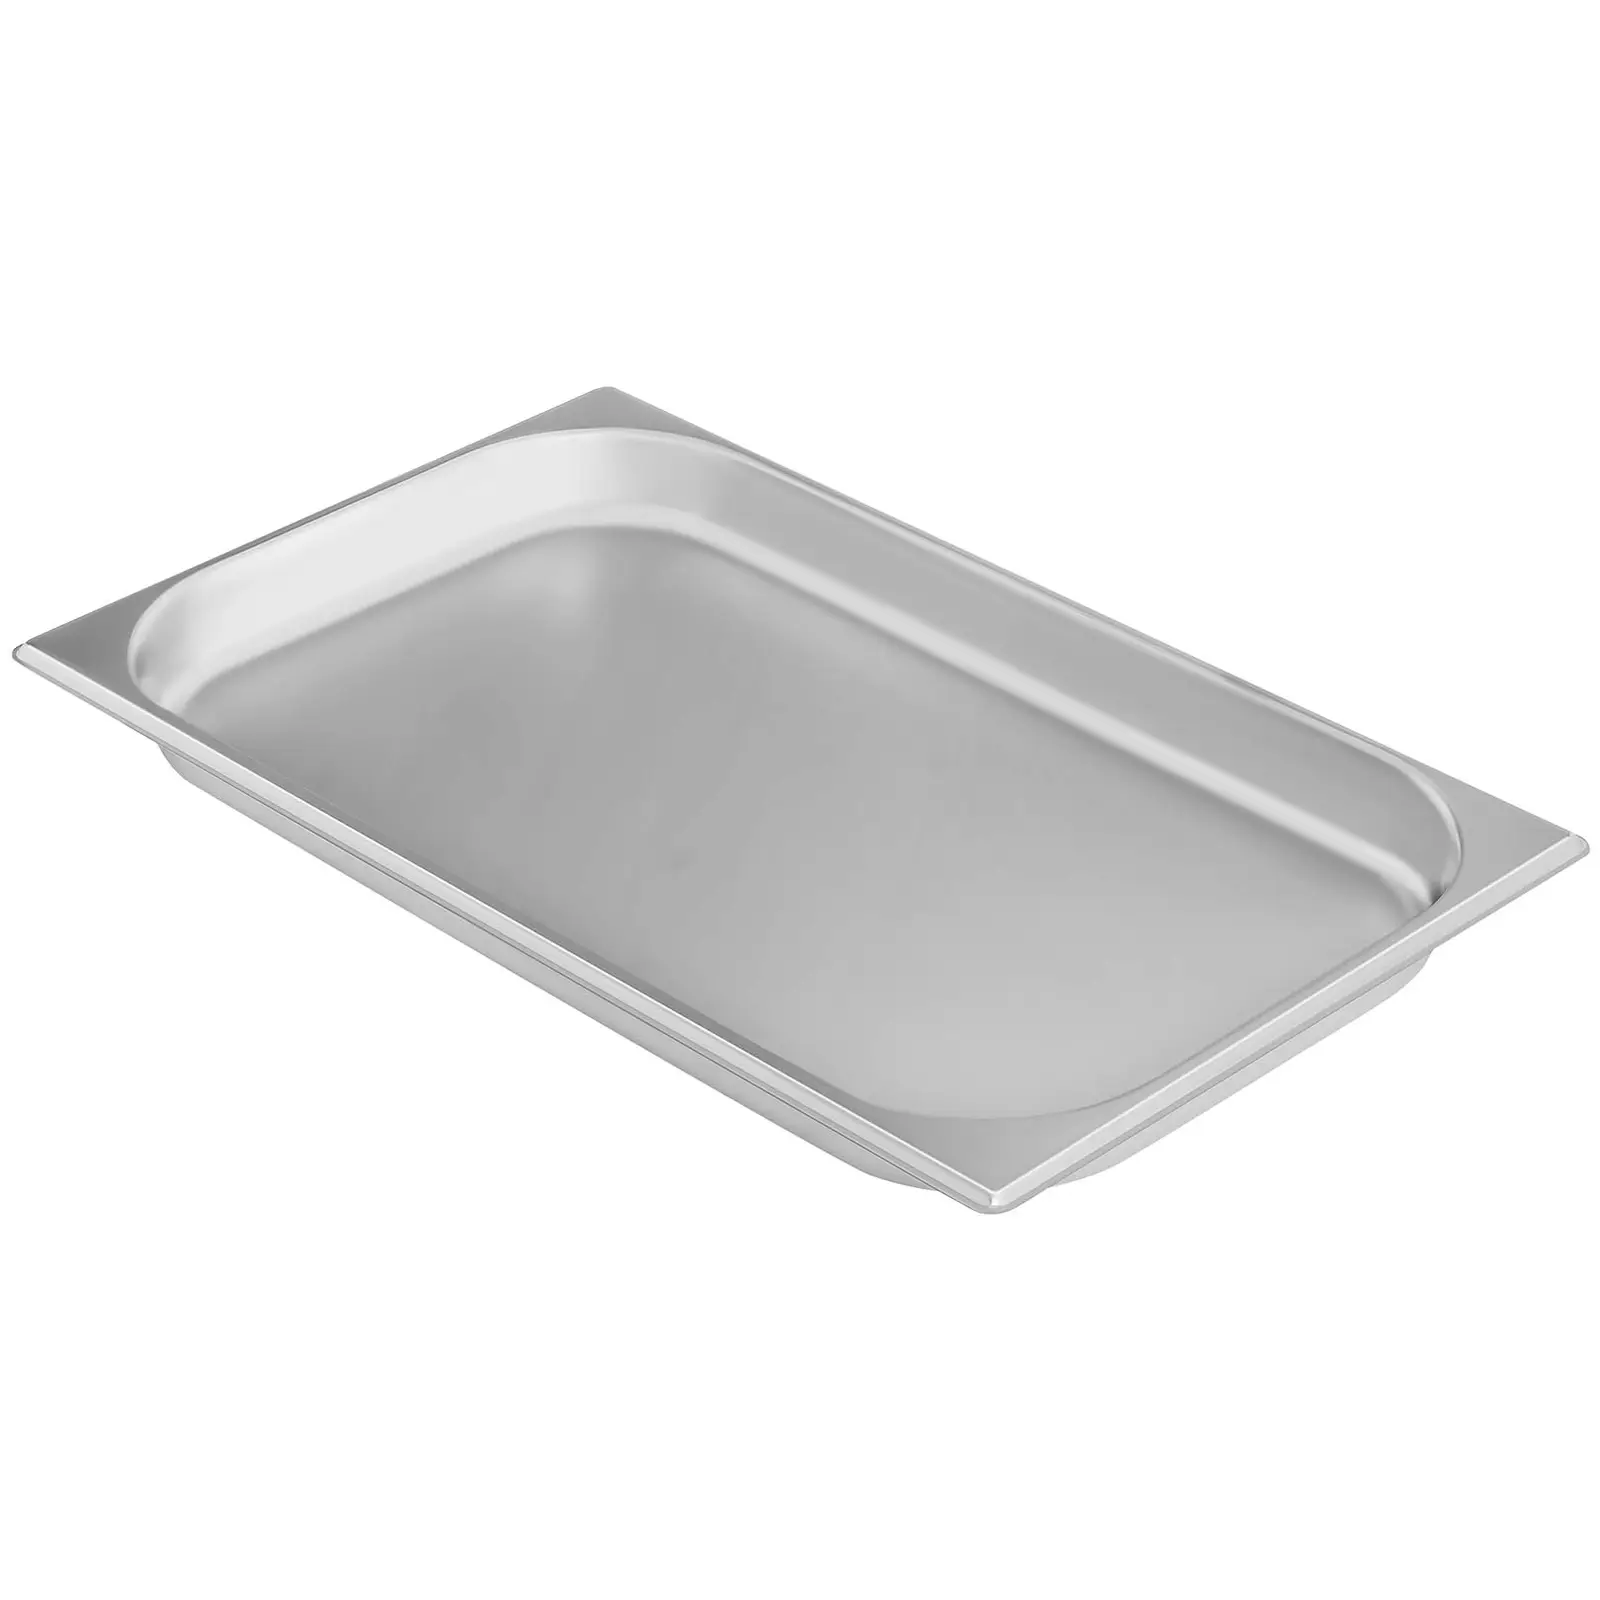 B-varer Gastronorm Tray - 1/1 - 40 mm